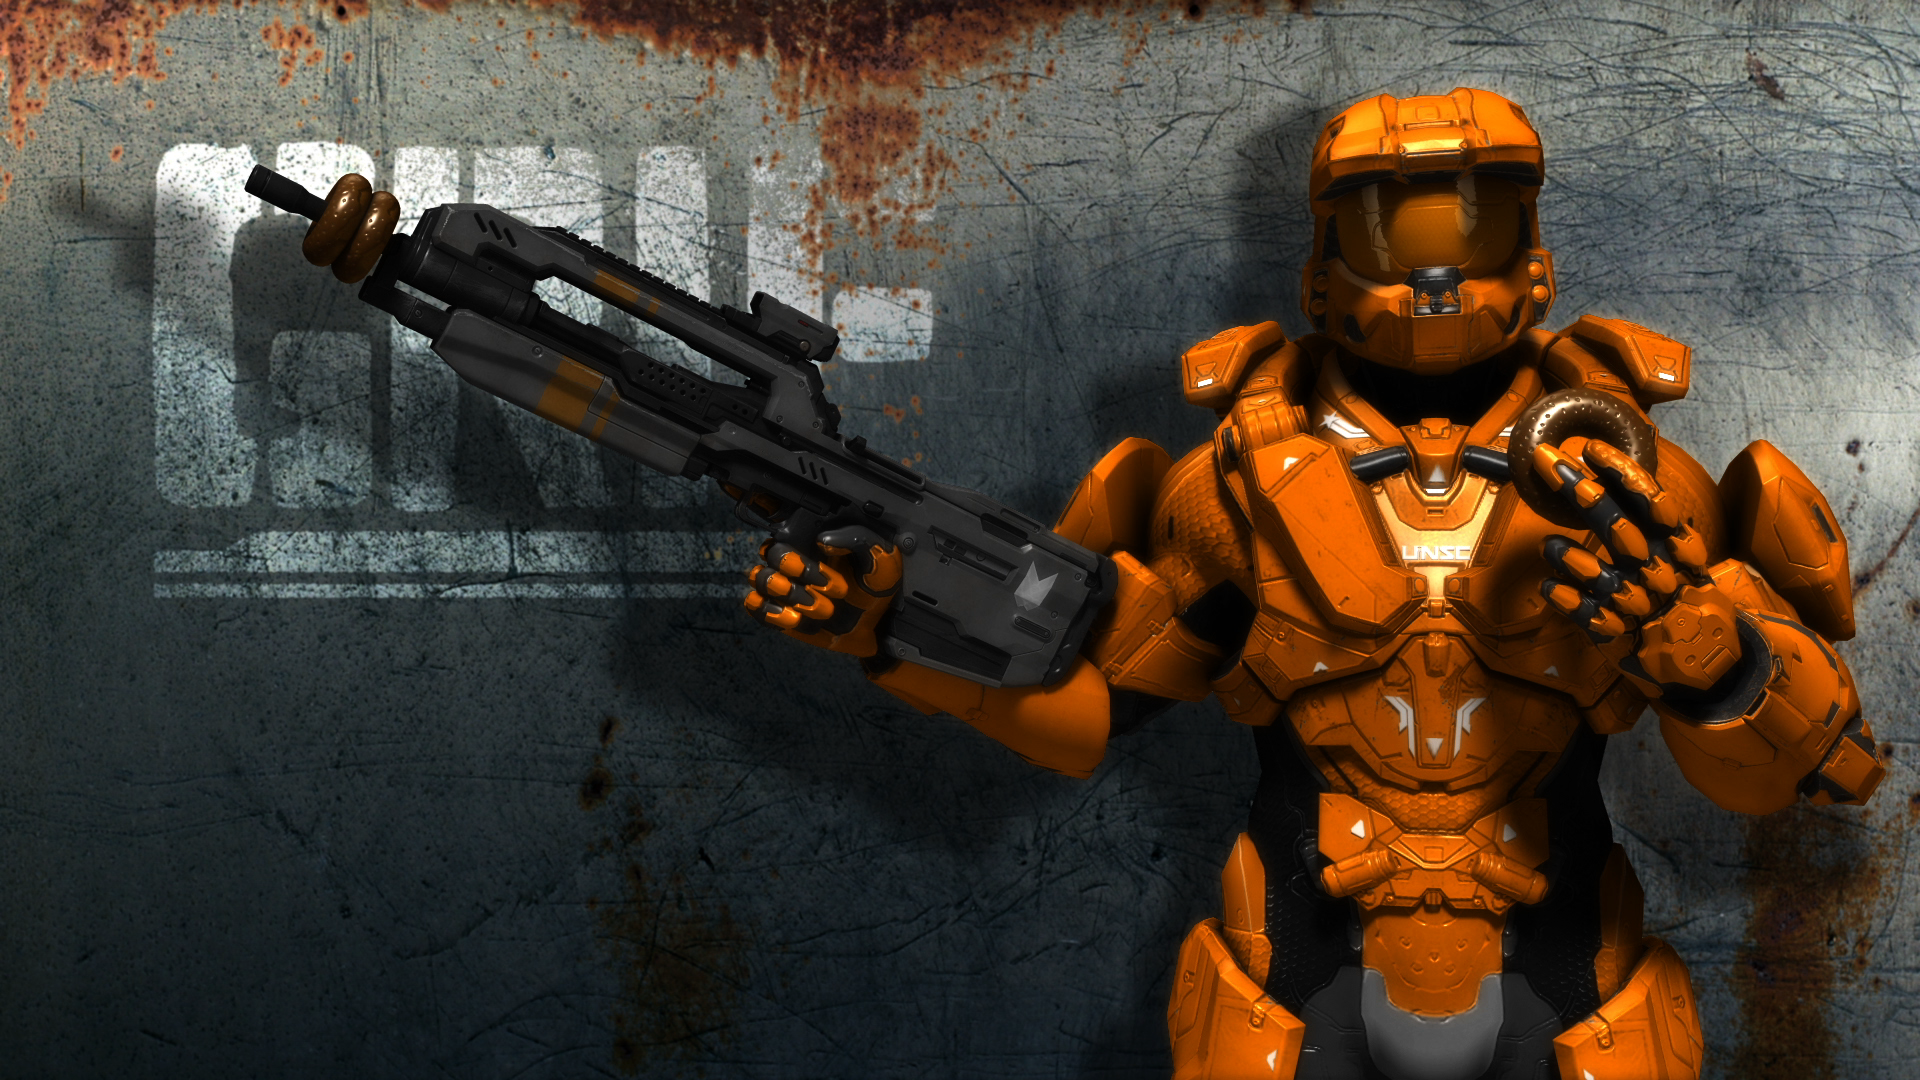 Red Vs Blue Wallpaper And Image Pictures Photos